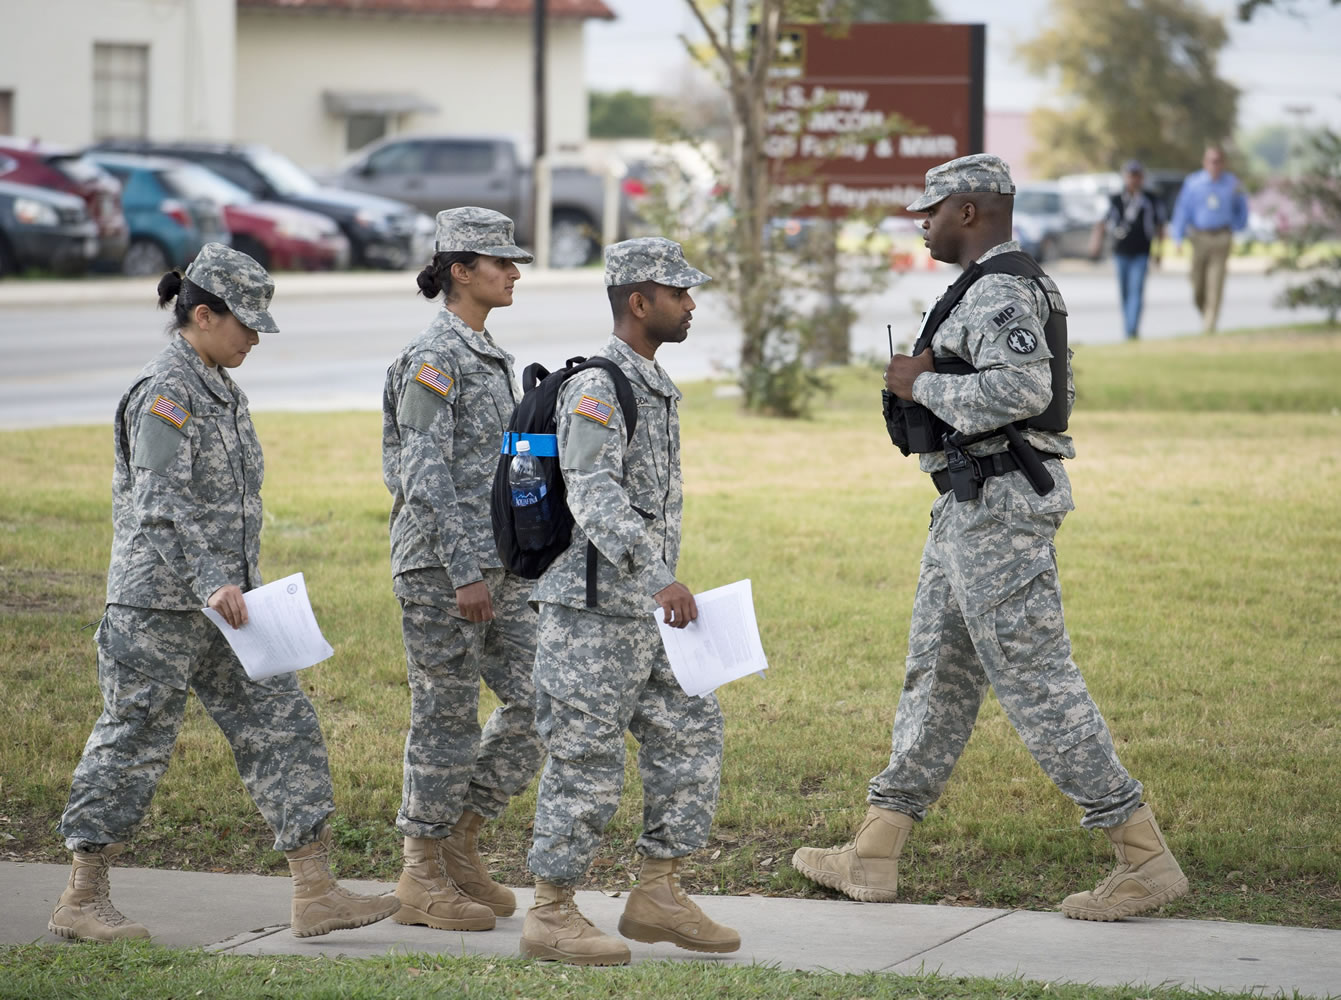 Soldiers walk past a military police officer, right, patrolling the perimeter of the US Army IMCOM HQ building prior to the Article 32 preliminary hearing to determine if Army Sgt. Bowe Bergdahl will be court martialed Thursday  at Fort Sam Houston in San Antonio. Bergdahl, who left his post in Afghanistan and was held by the Taliban for five years, is charged with desertion and misbehavior before the enemy.